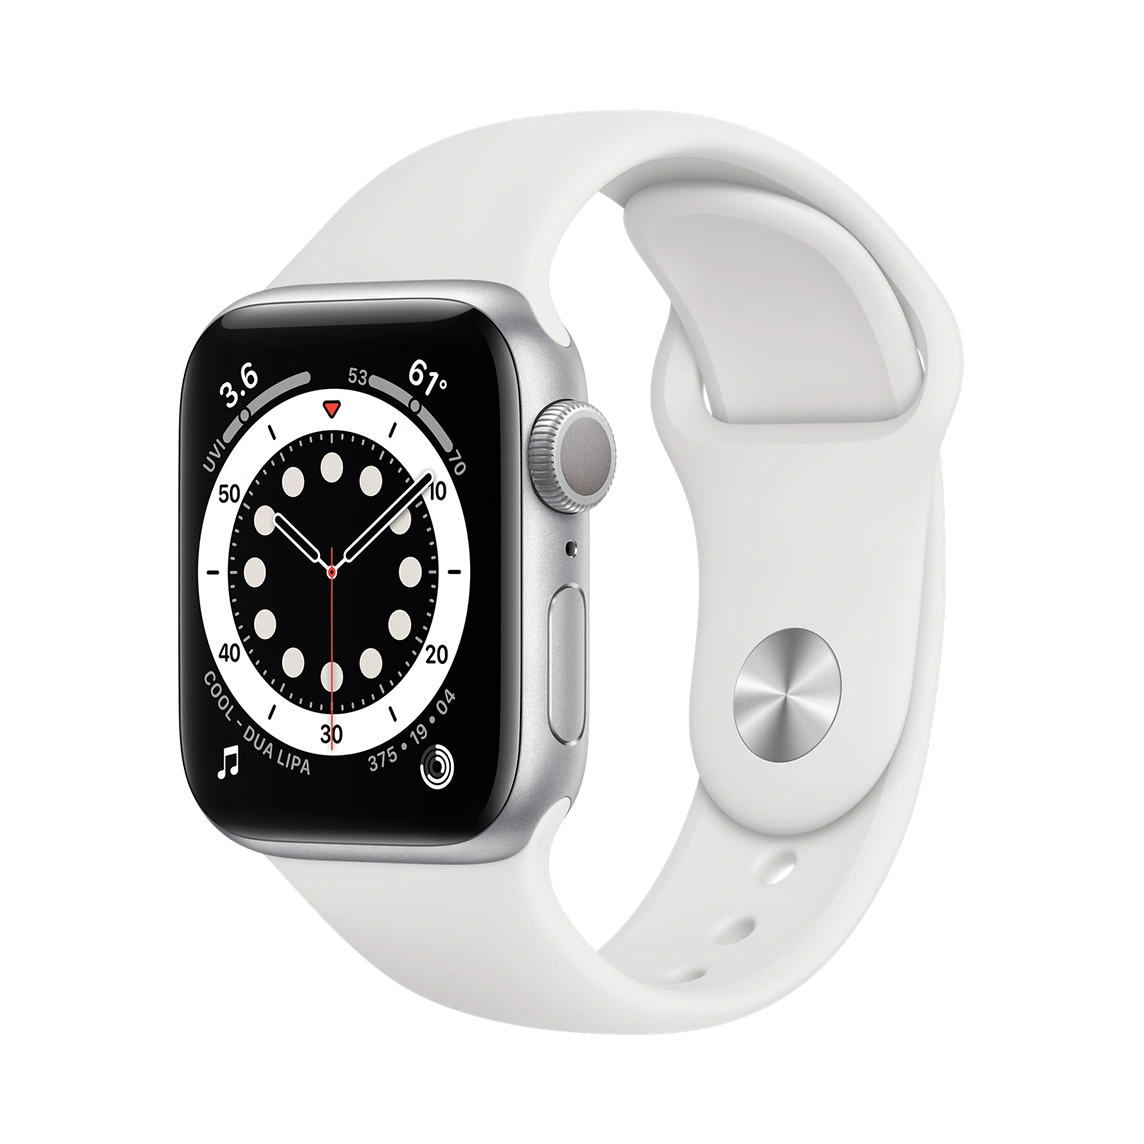 Apple Watch S6 Silver Alu + White Sport Band  40mm / MG283 | Apple Watch S6 Silver Alu + White Sport Band  44mm / M00D3 | Apple Watch S6 Silver Alu + White Sport Band  40mm / MG283 / 18 Month | Apple Watch S6 Silver Alu + White Sport Band  44mm / M00D3 / 18 Month